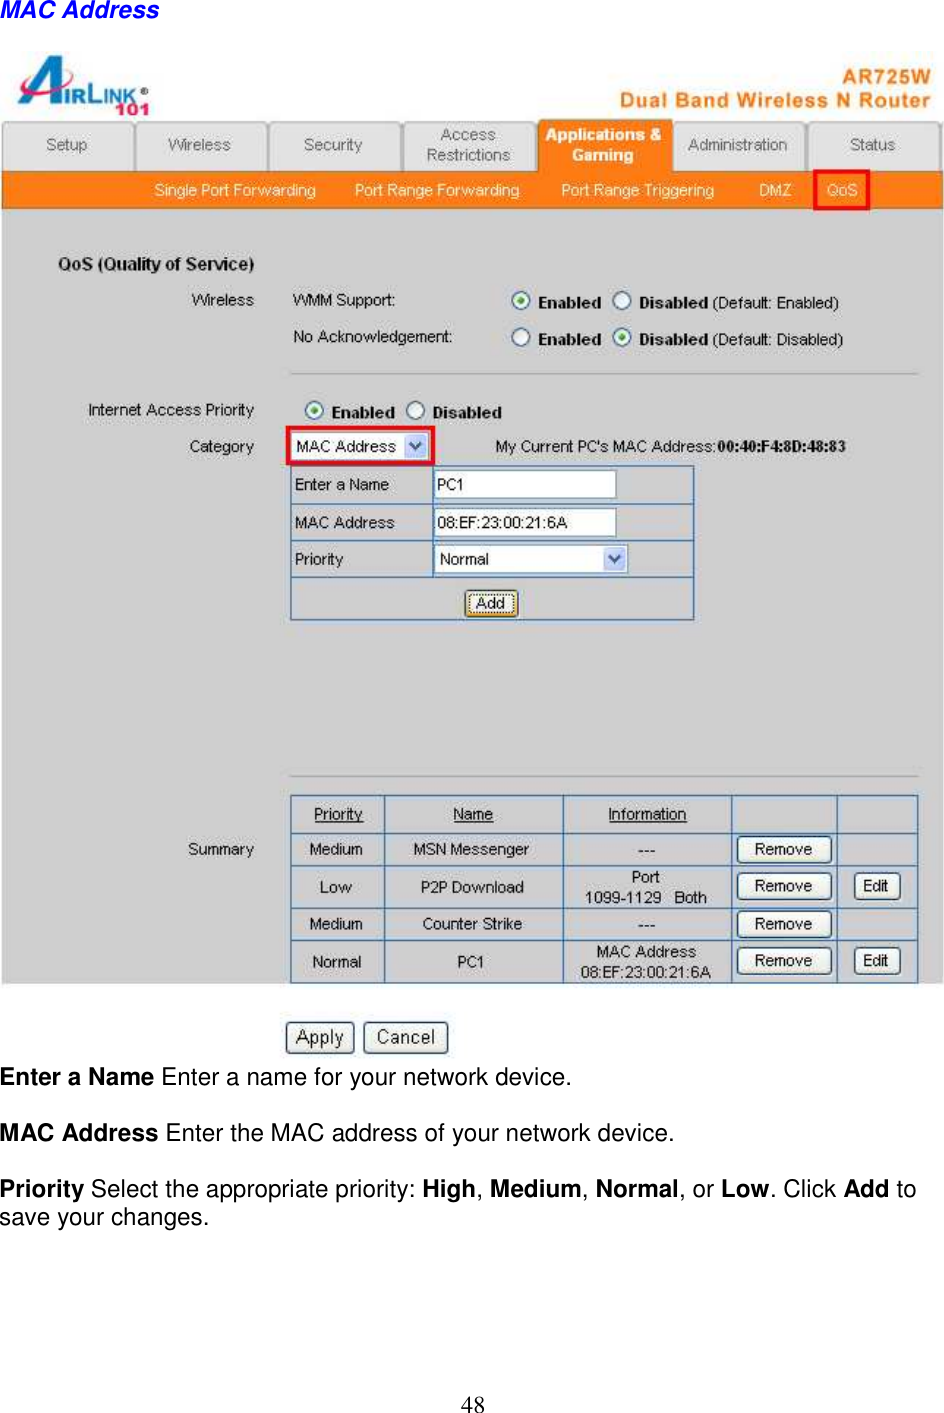 48 MAC Address   Enter a Name Enter a name for your network device.  MAC Address Enter the MAC address of your network device.  Priority Select the appropriate priority: High, Medium, Normal, or Low. Click Add to save your changes.       